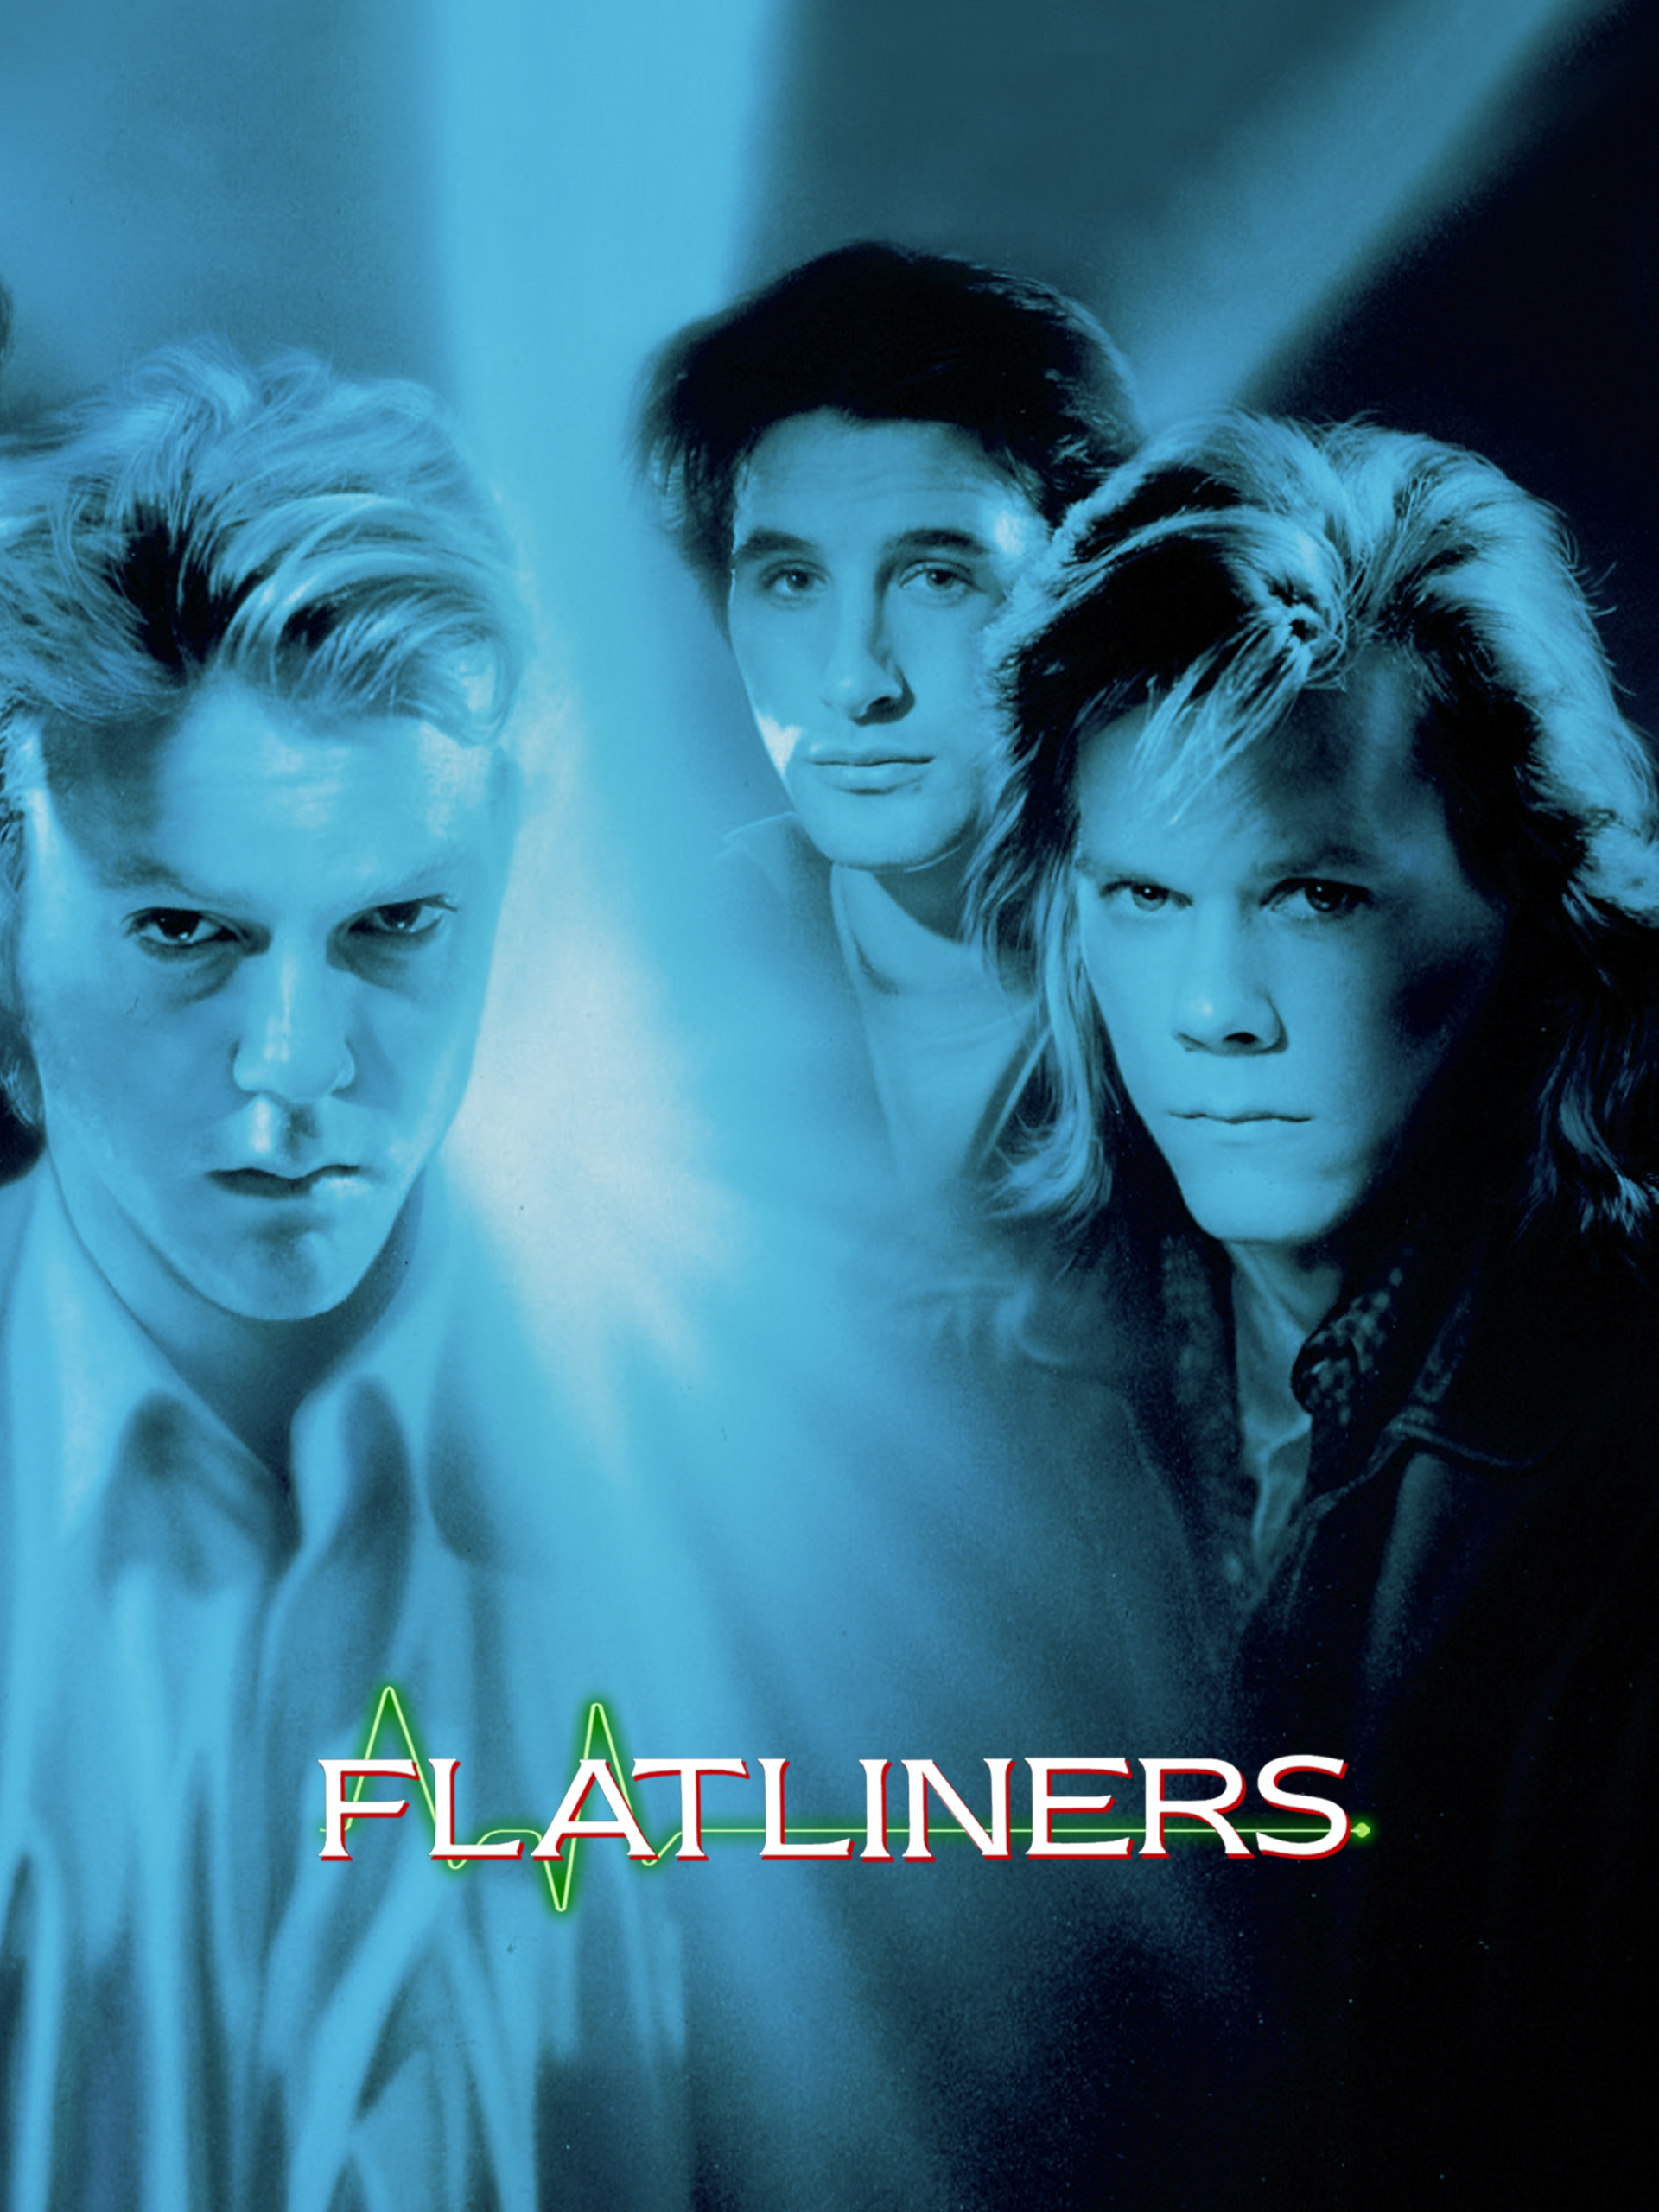 Flatliners</a><br> by <a href='/profile/Bling-King/'>Bling King</a>